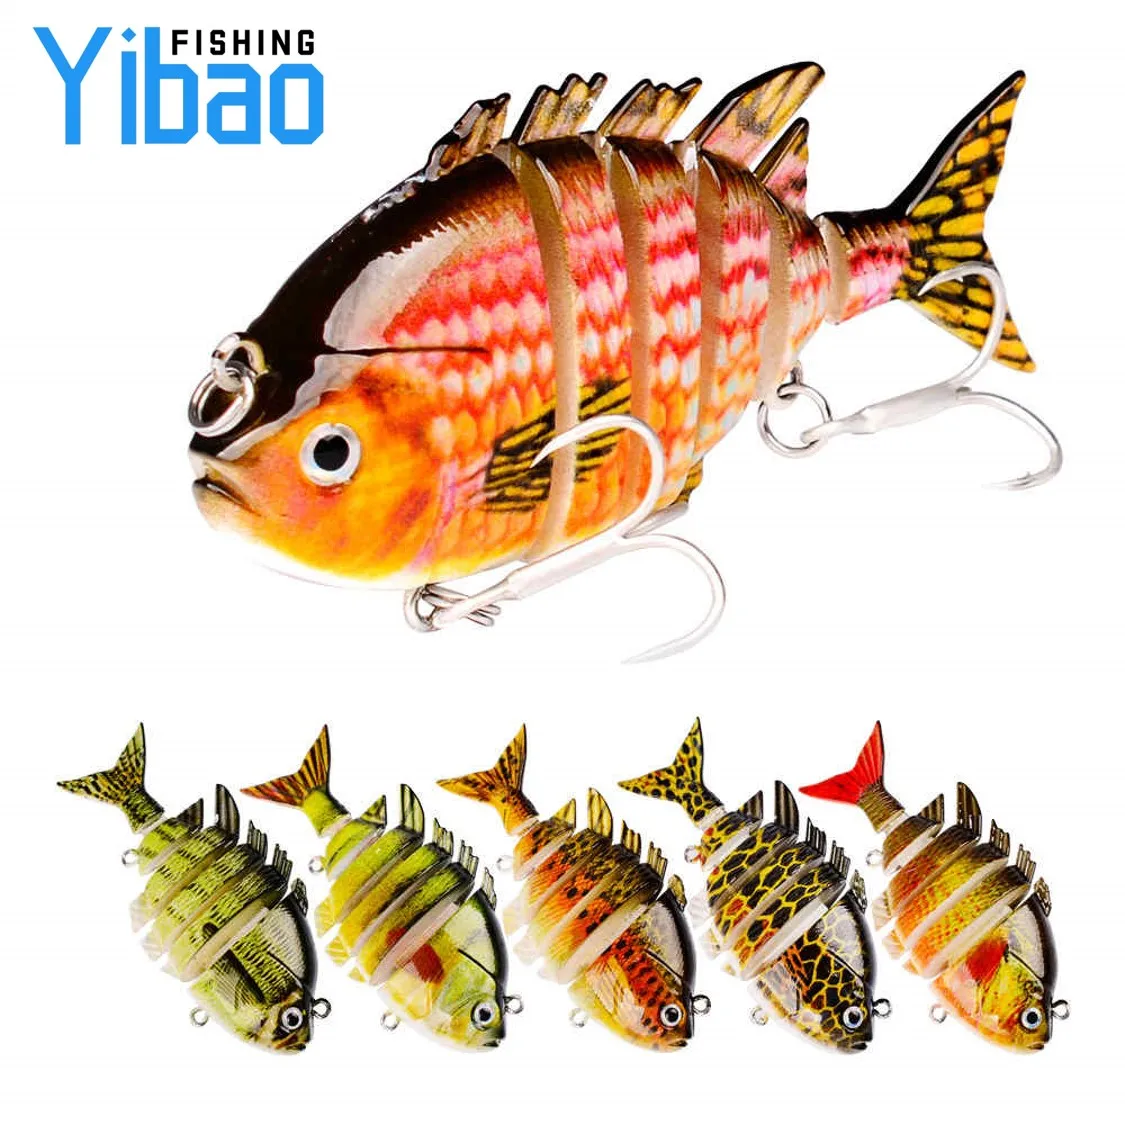 

YIBAO 8cm 15.5g Sinking Wobblers Fishing Lures Jointed 6 Segment Hard Artificial Bait Fishing Tackle Lure Crankbait Swimbait, 8 colors